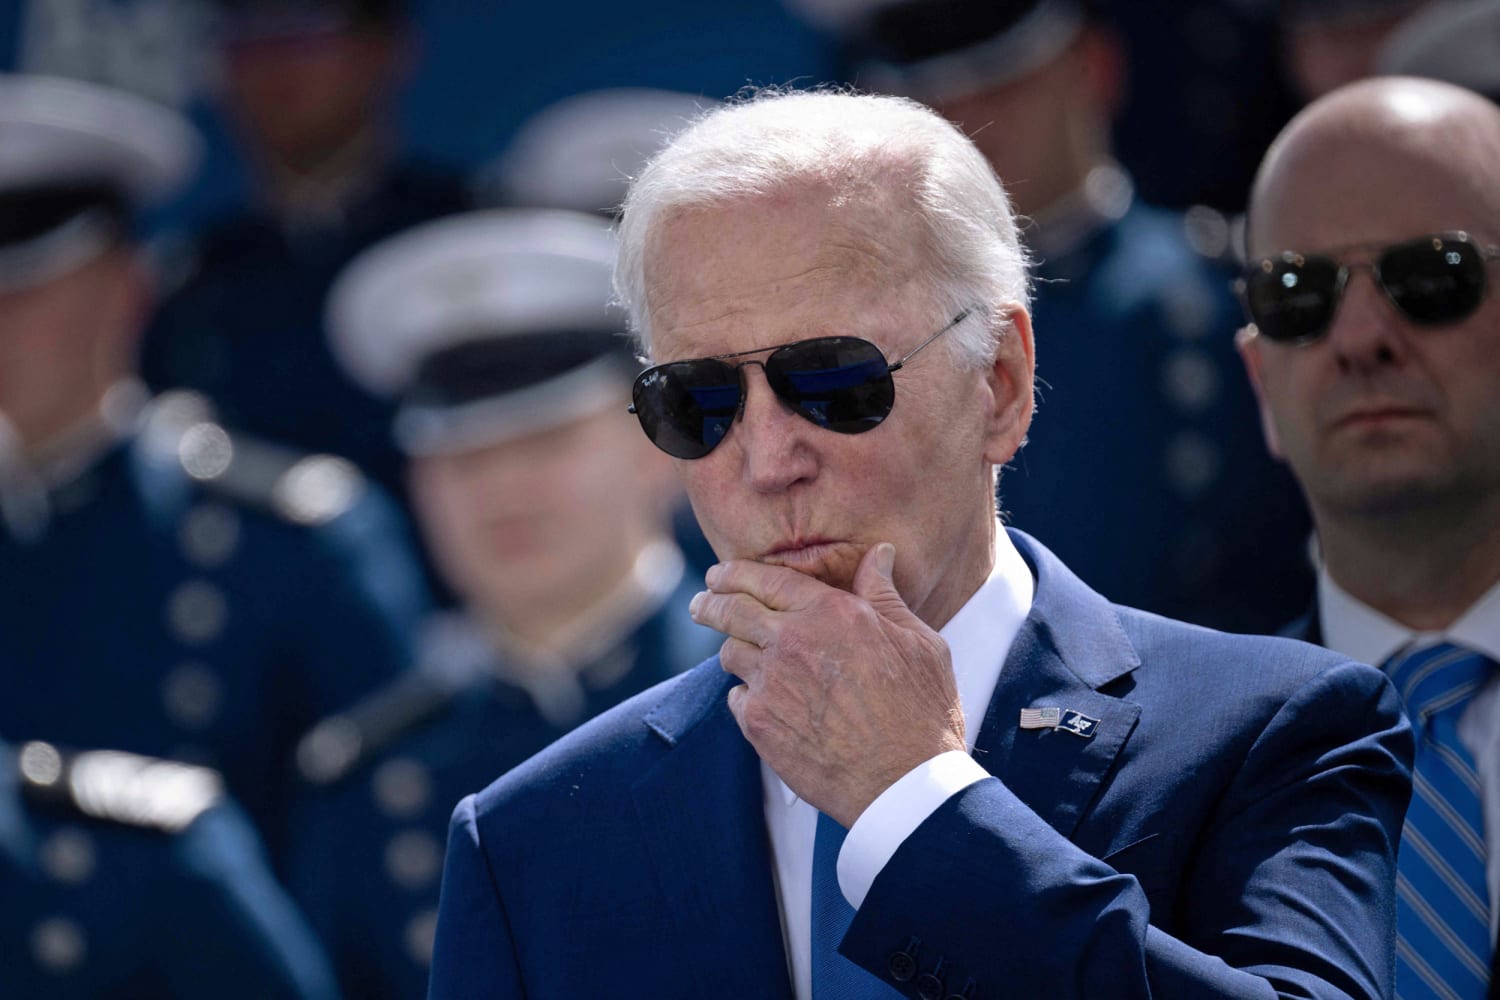 Trump tries to make his own criminal indictment about Joe Biden